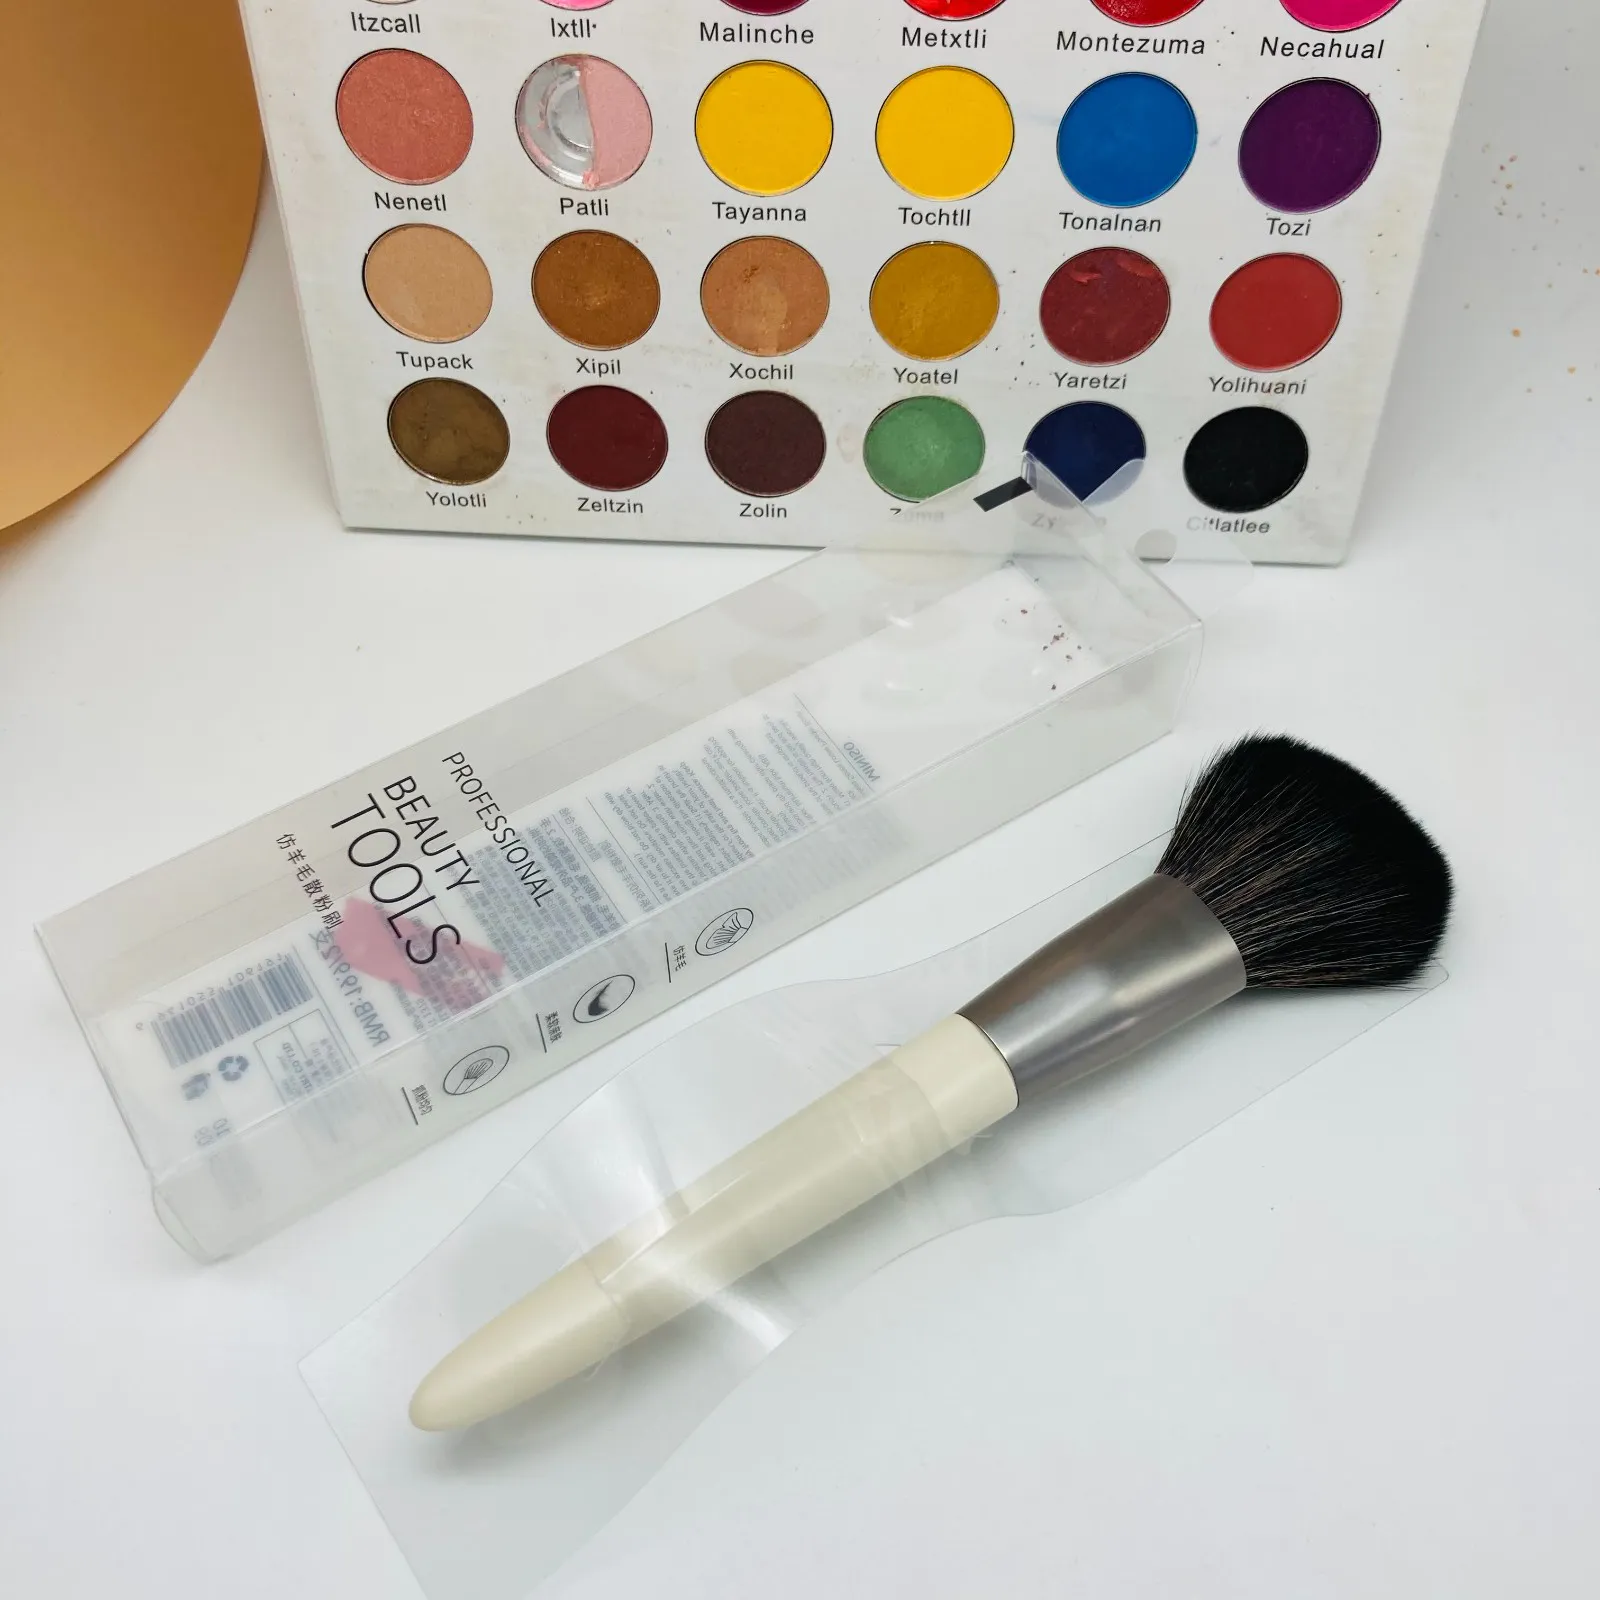 Suprabeauty better makeup brushes factory direct supply for sale